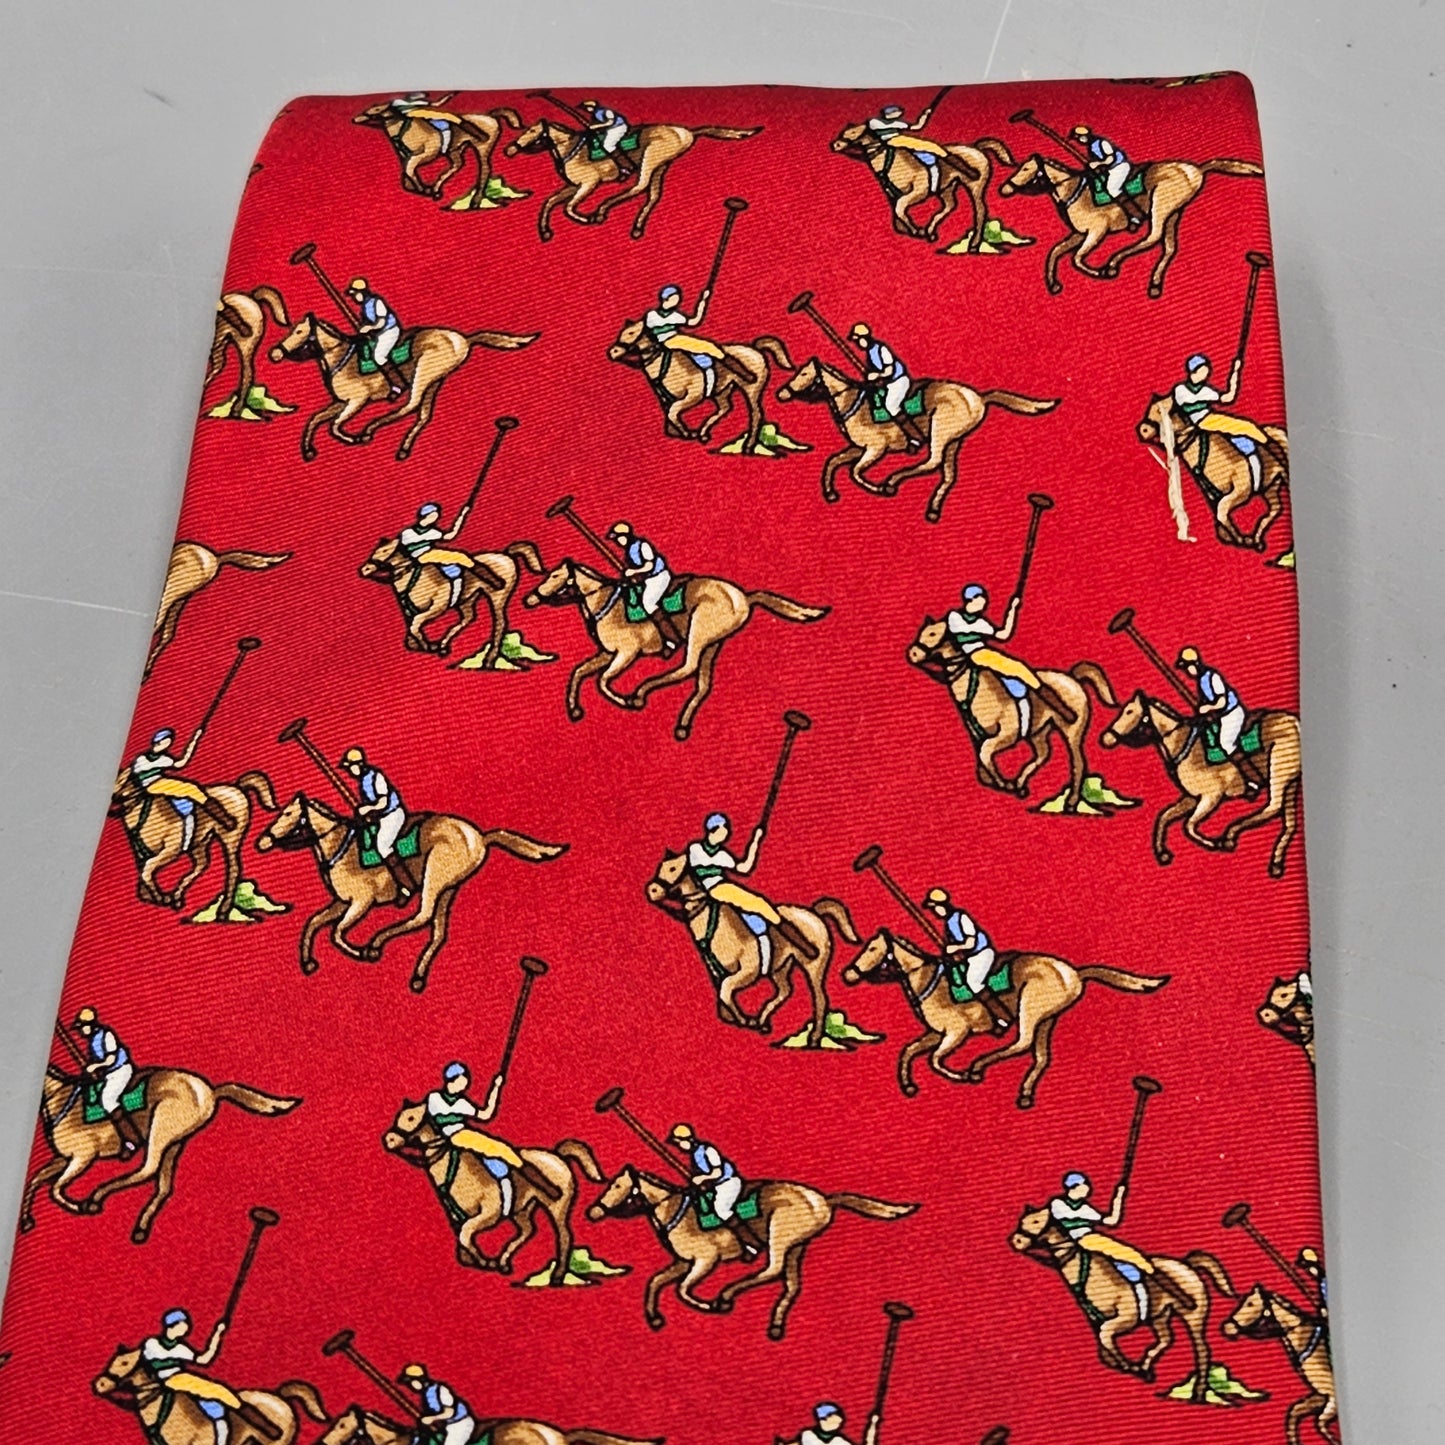 Joseph A Banks Red Silk Necktie with Polo Players